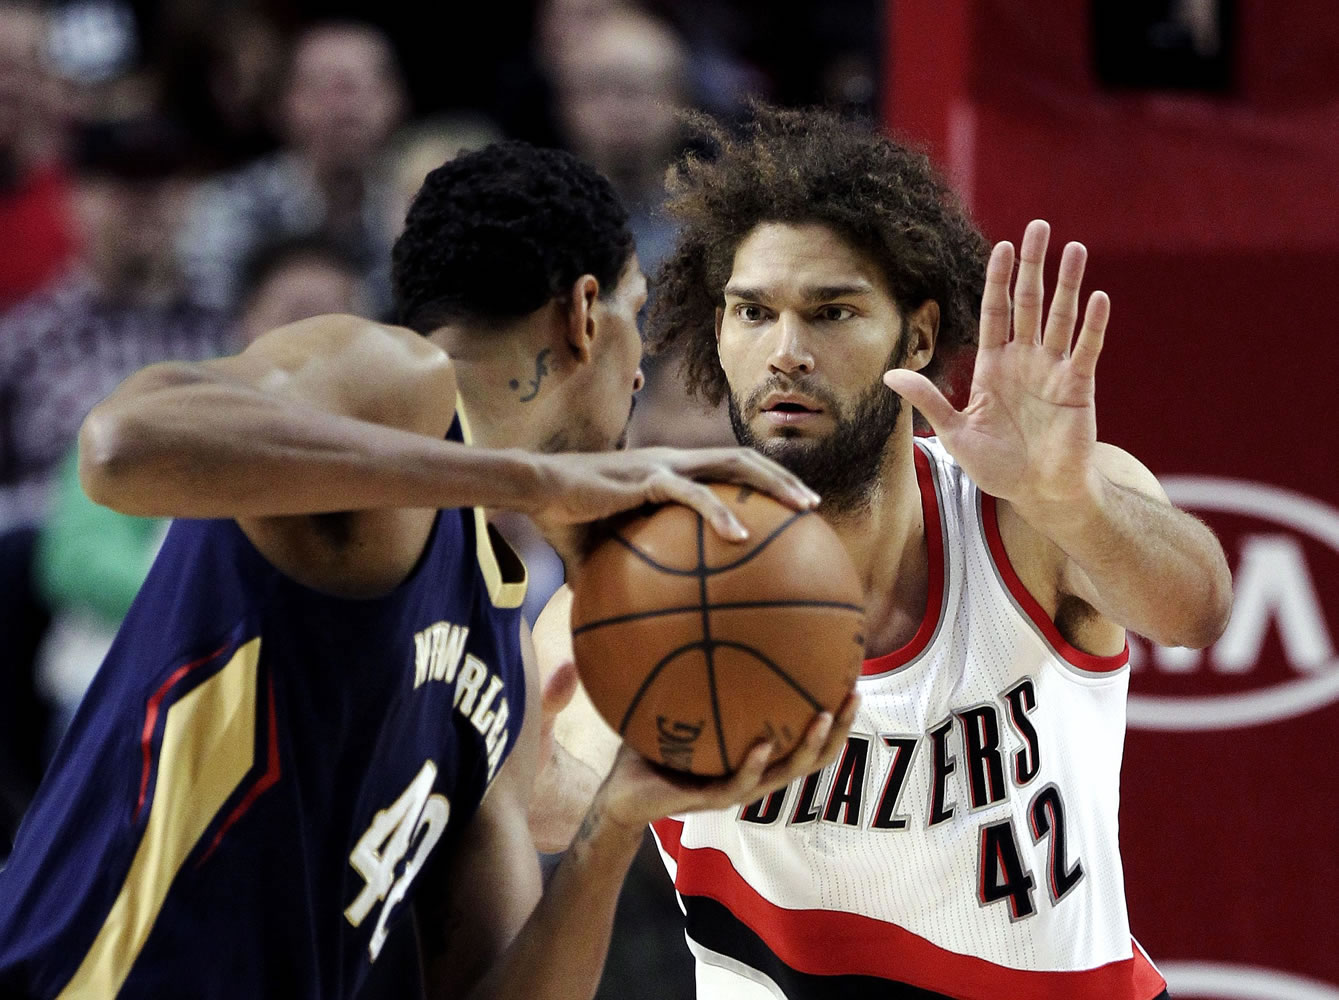 Portland Trail Blazers center Robin Lopez, right, is expected back in the Blazers' lineup against the Utah Jazz on Tuesday, Feb. 3, 2015. He has been out since Dec. 15 with a broken hand.